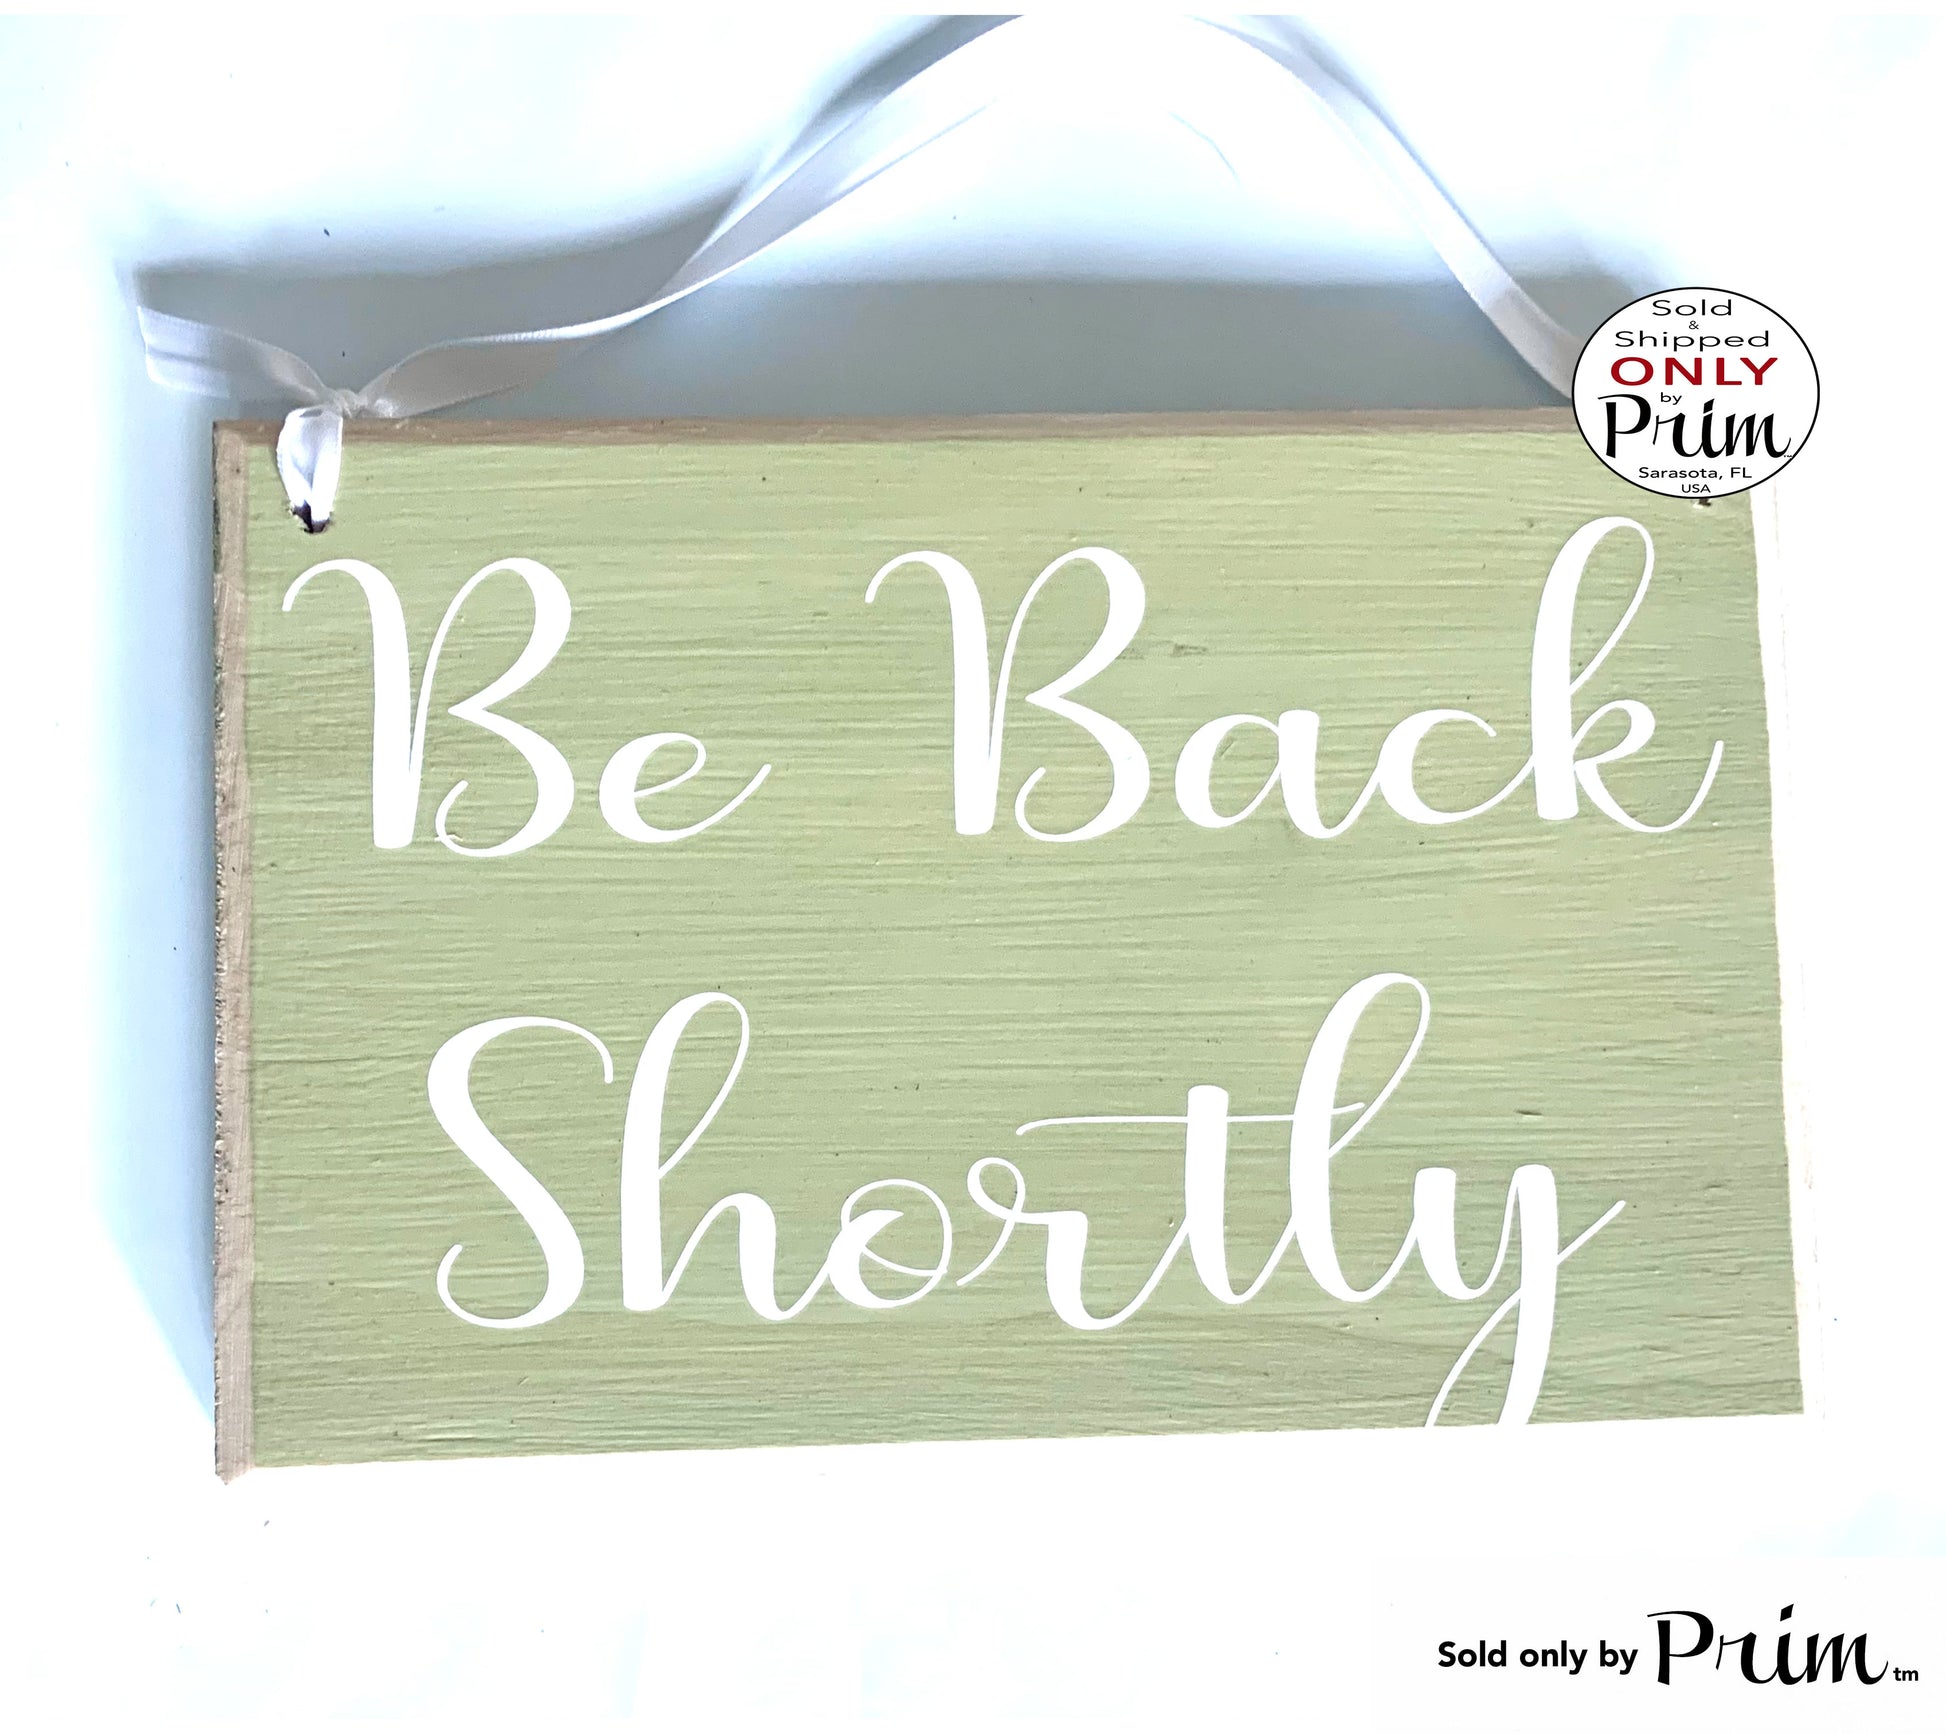 Designs by Prim 8x6 Be Back Shortly Custo Wood Sign I'll We'll Be Right Back Closed Come Soon Please Wait Unavailable Office Business Door Hanger Plaque